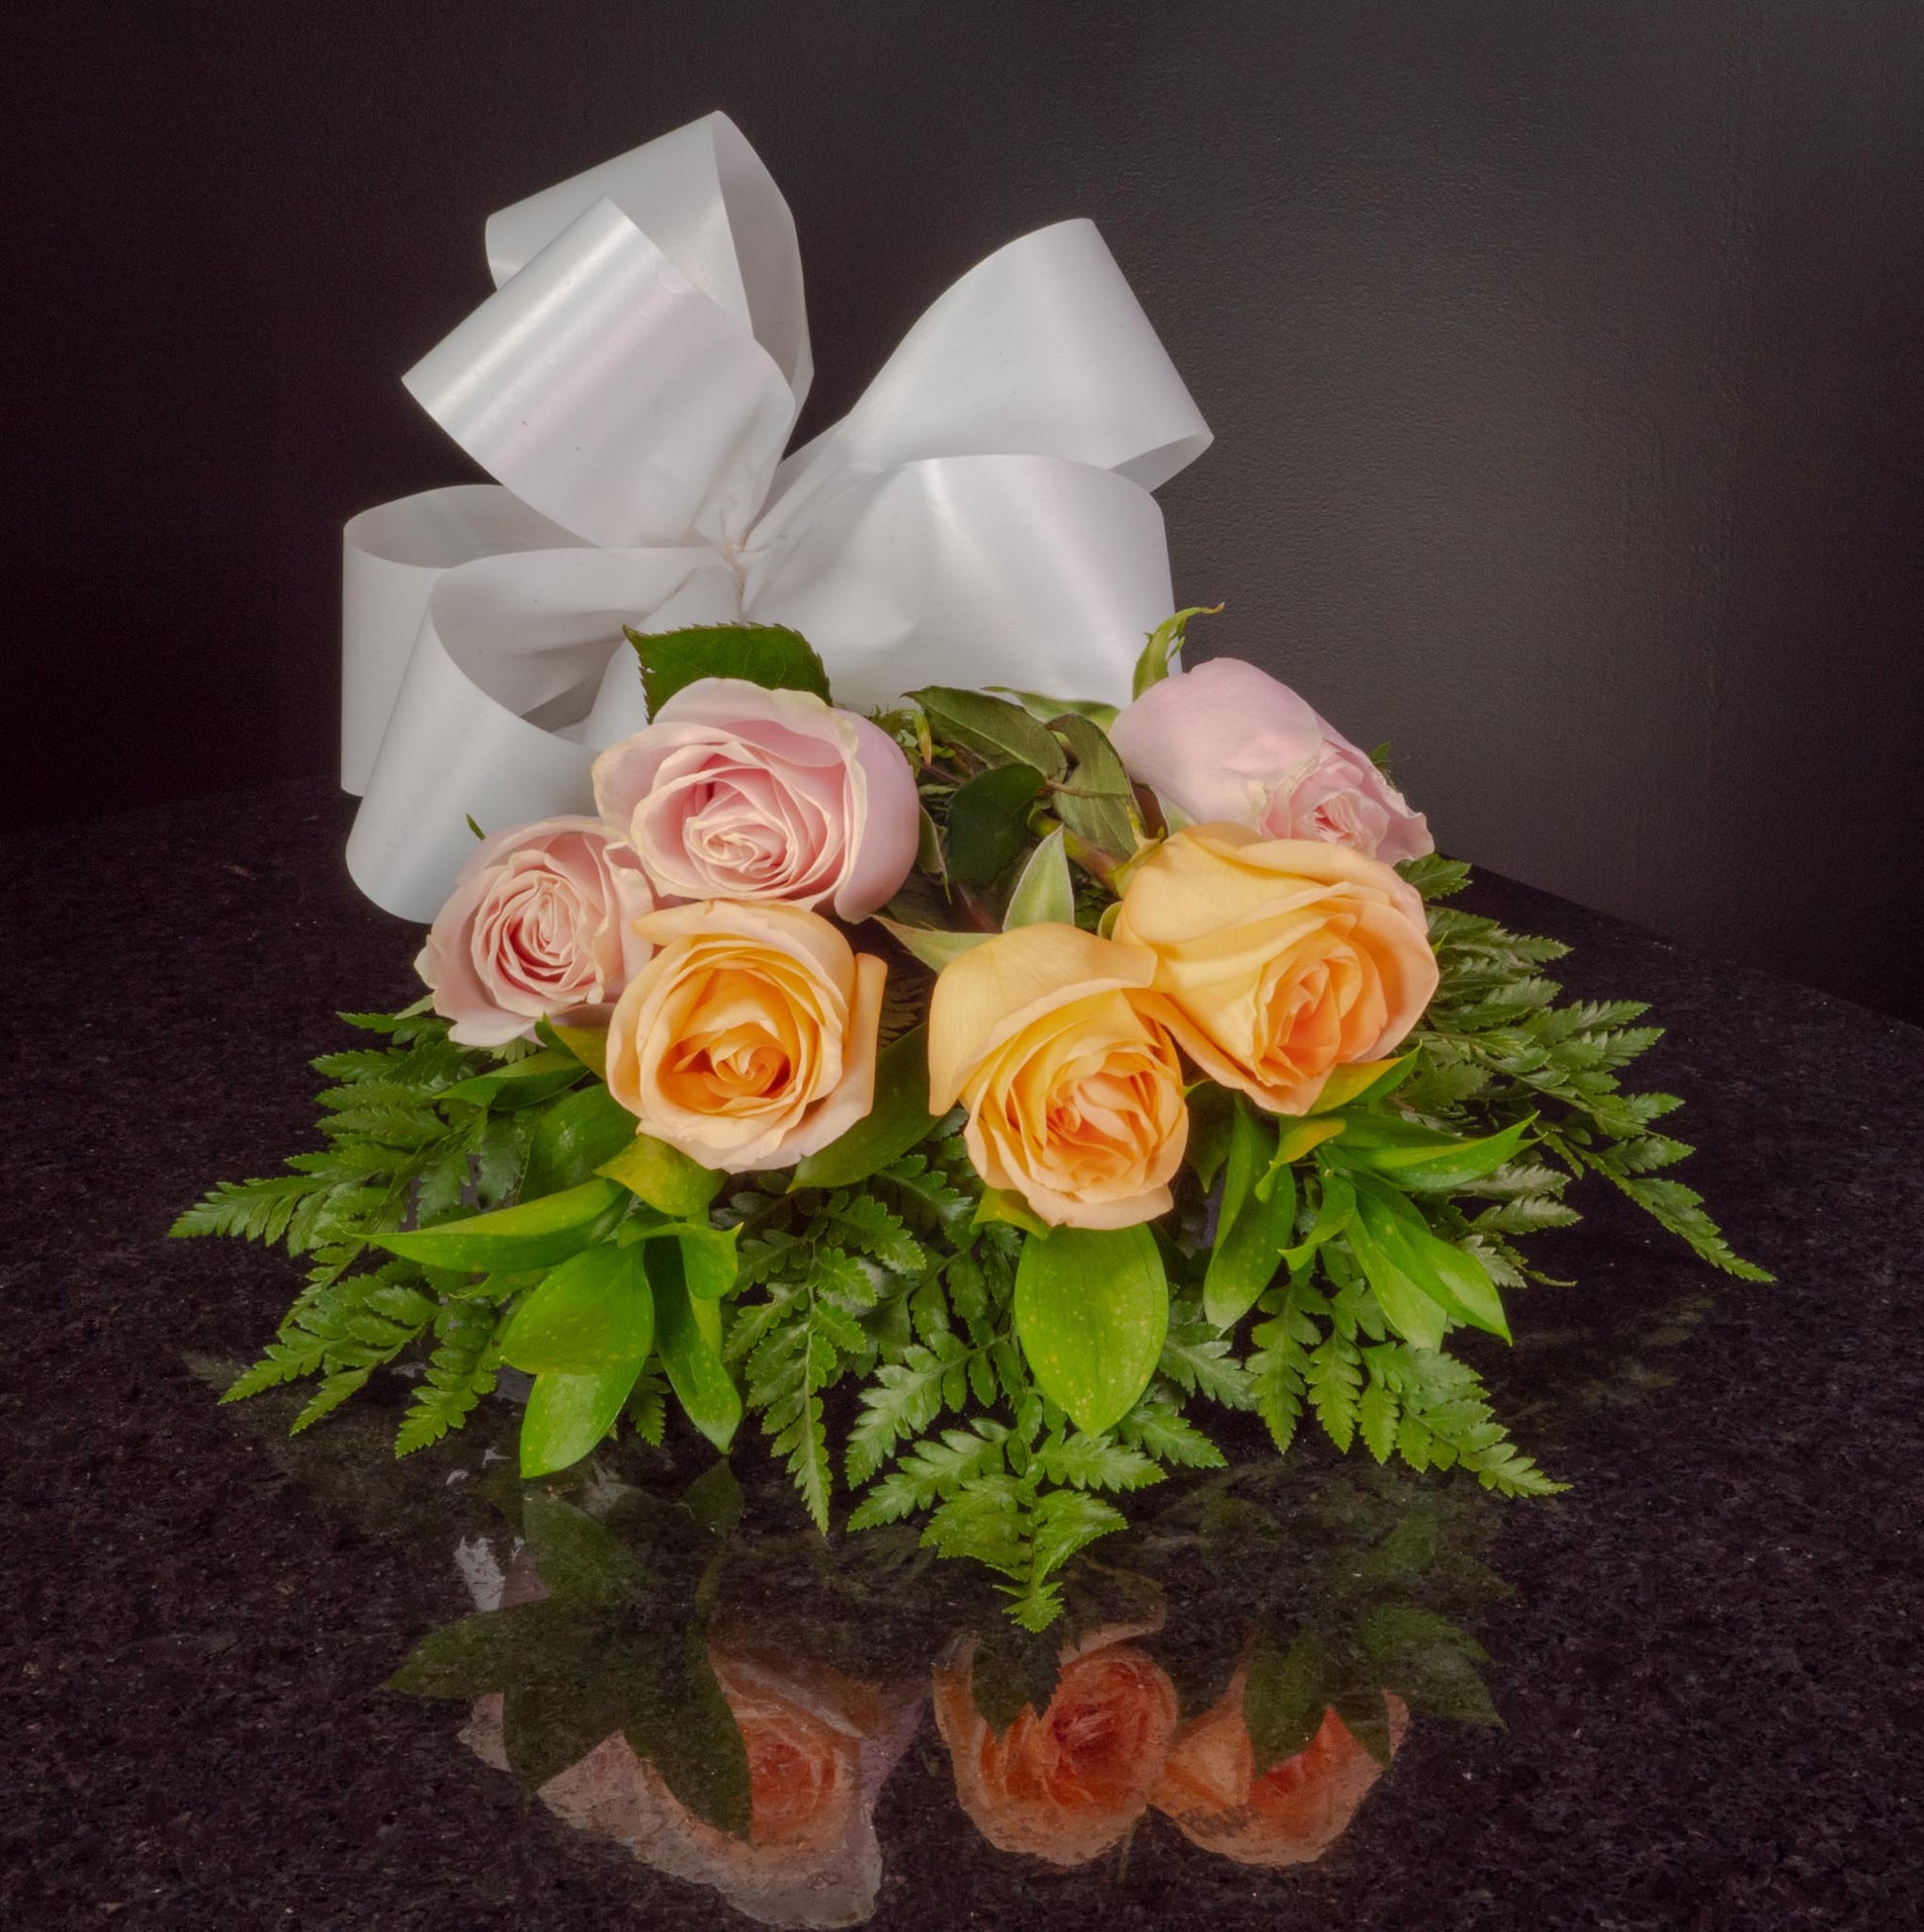 Peach Blush Pink Roses 6 Roses / Hand-Tied / Basic